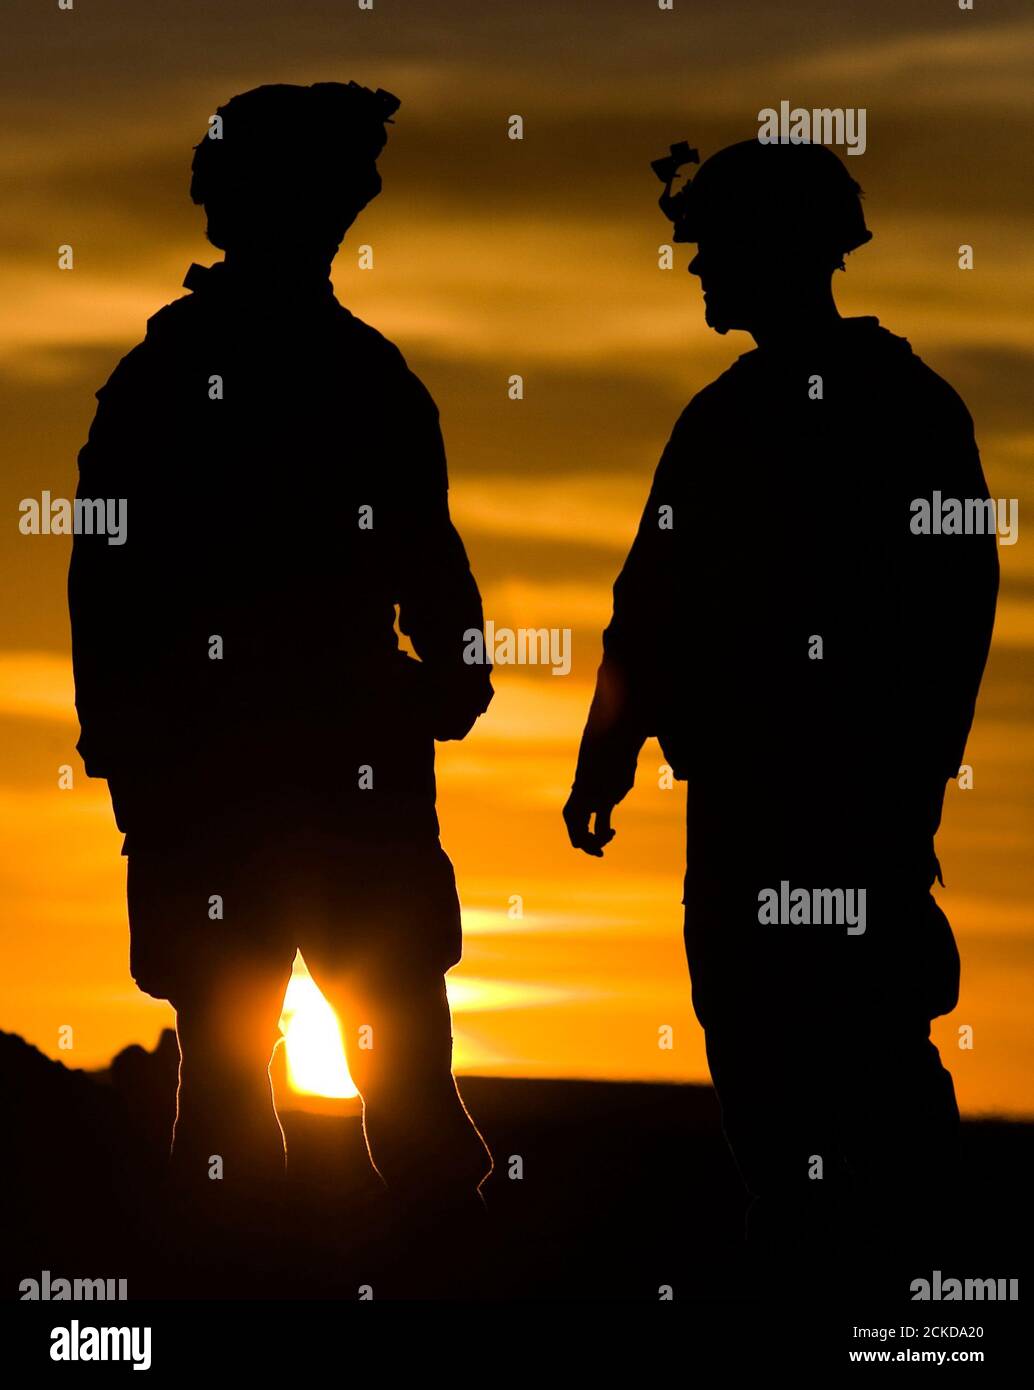 U.S. Marines from 3rd Battalion 4th Marines talk during sunset at base Delaram in Nimroz province, southern Afghanistan January 13, 2010. REUTERS/Marko Djurica (AFGHANISTAN - Tags: MILITARY CONFLICT) Stock Photo